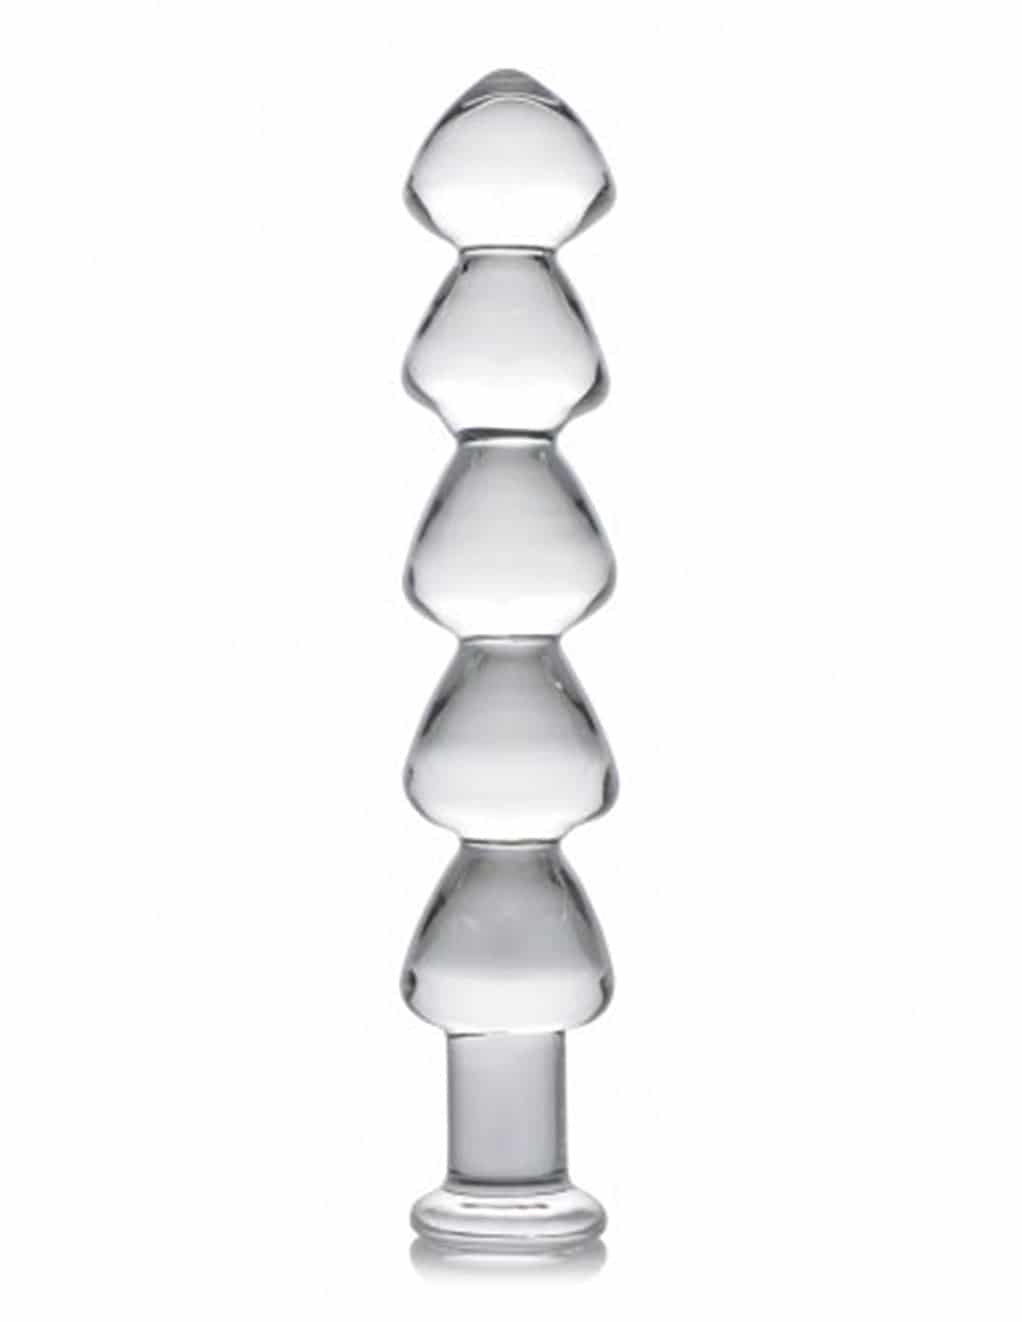 Product Master Series Drops Anal Link Glass Dildo